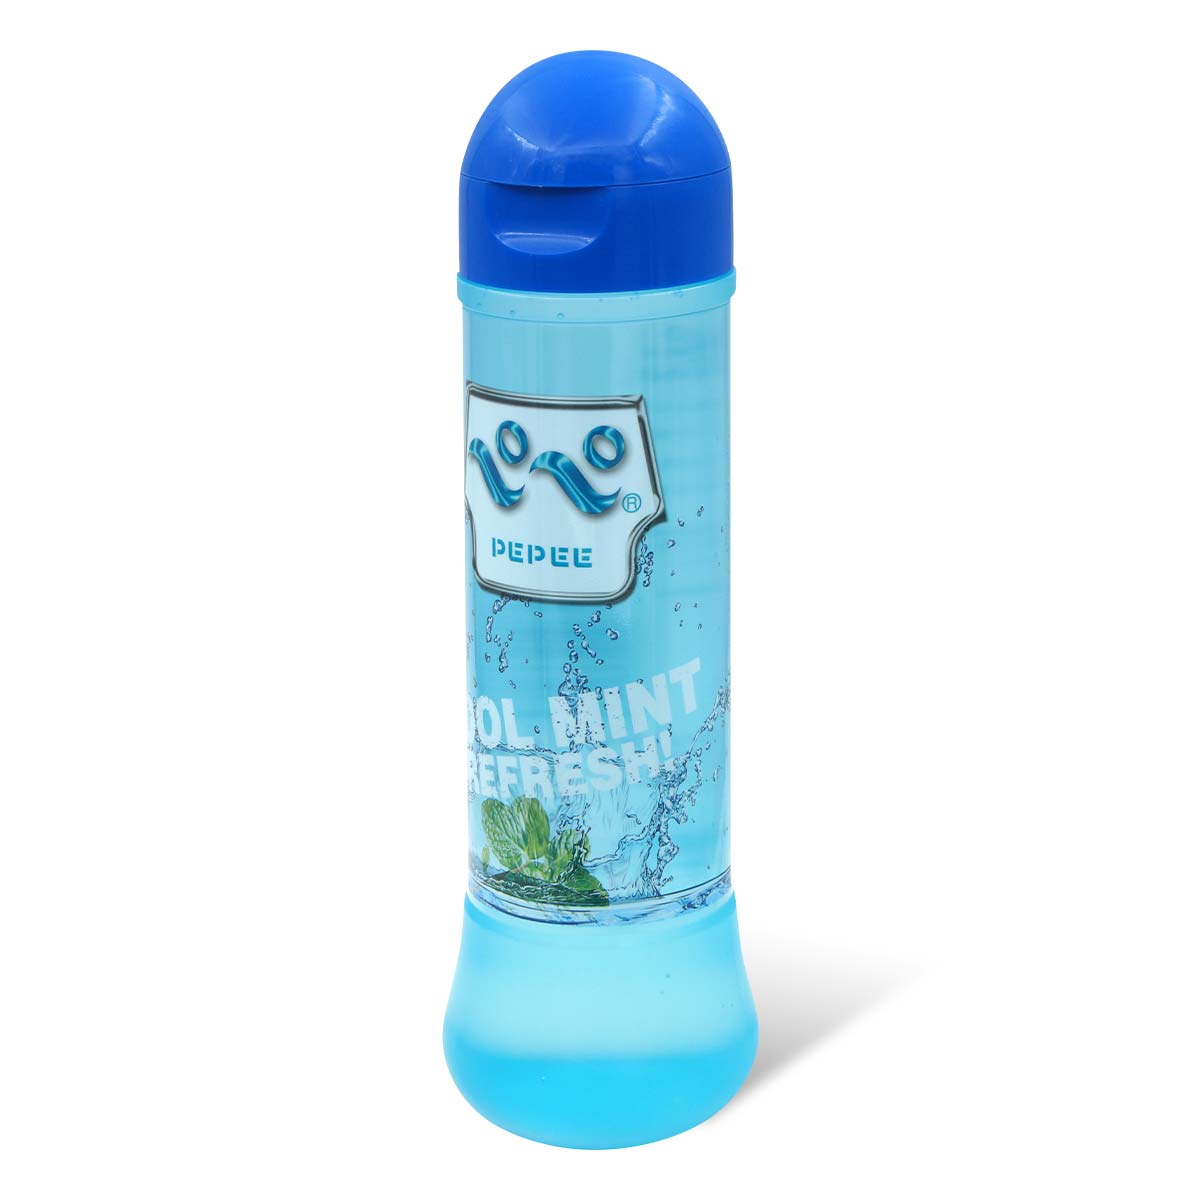 PEPEE 360 Cool Mint 360ml water-based lubricant-p_1